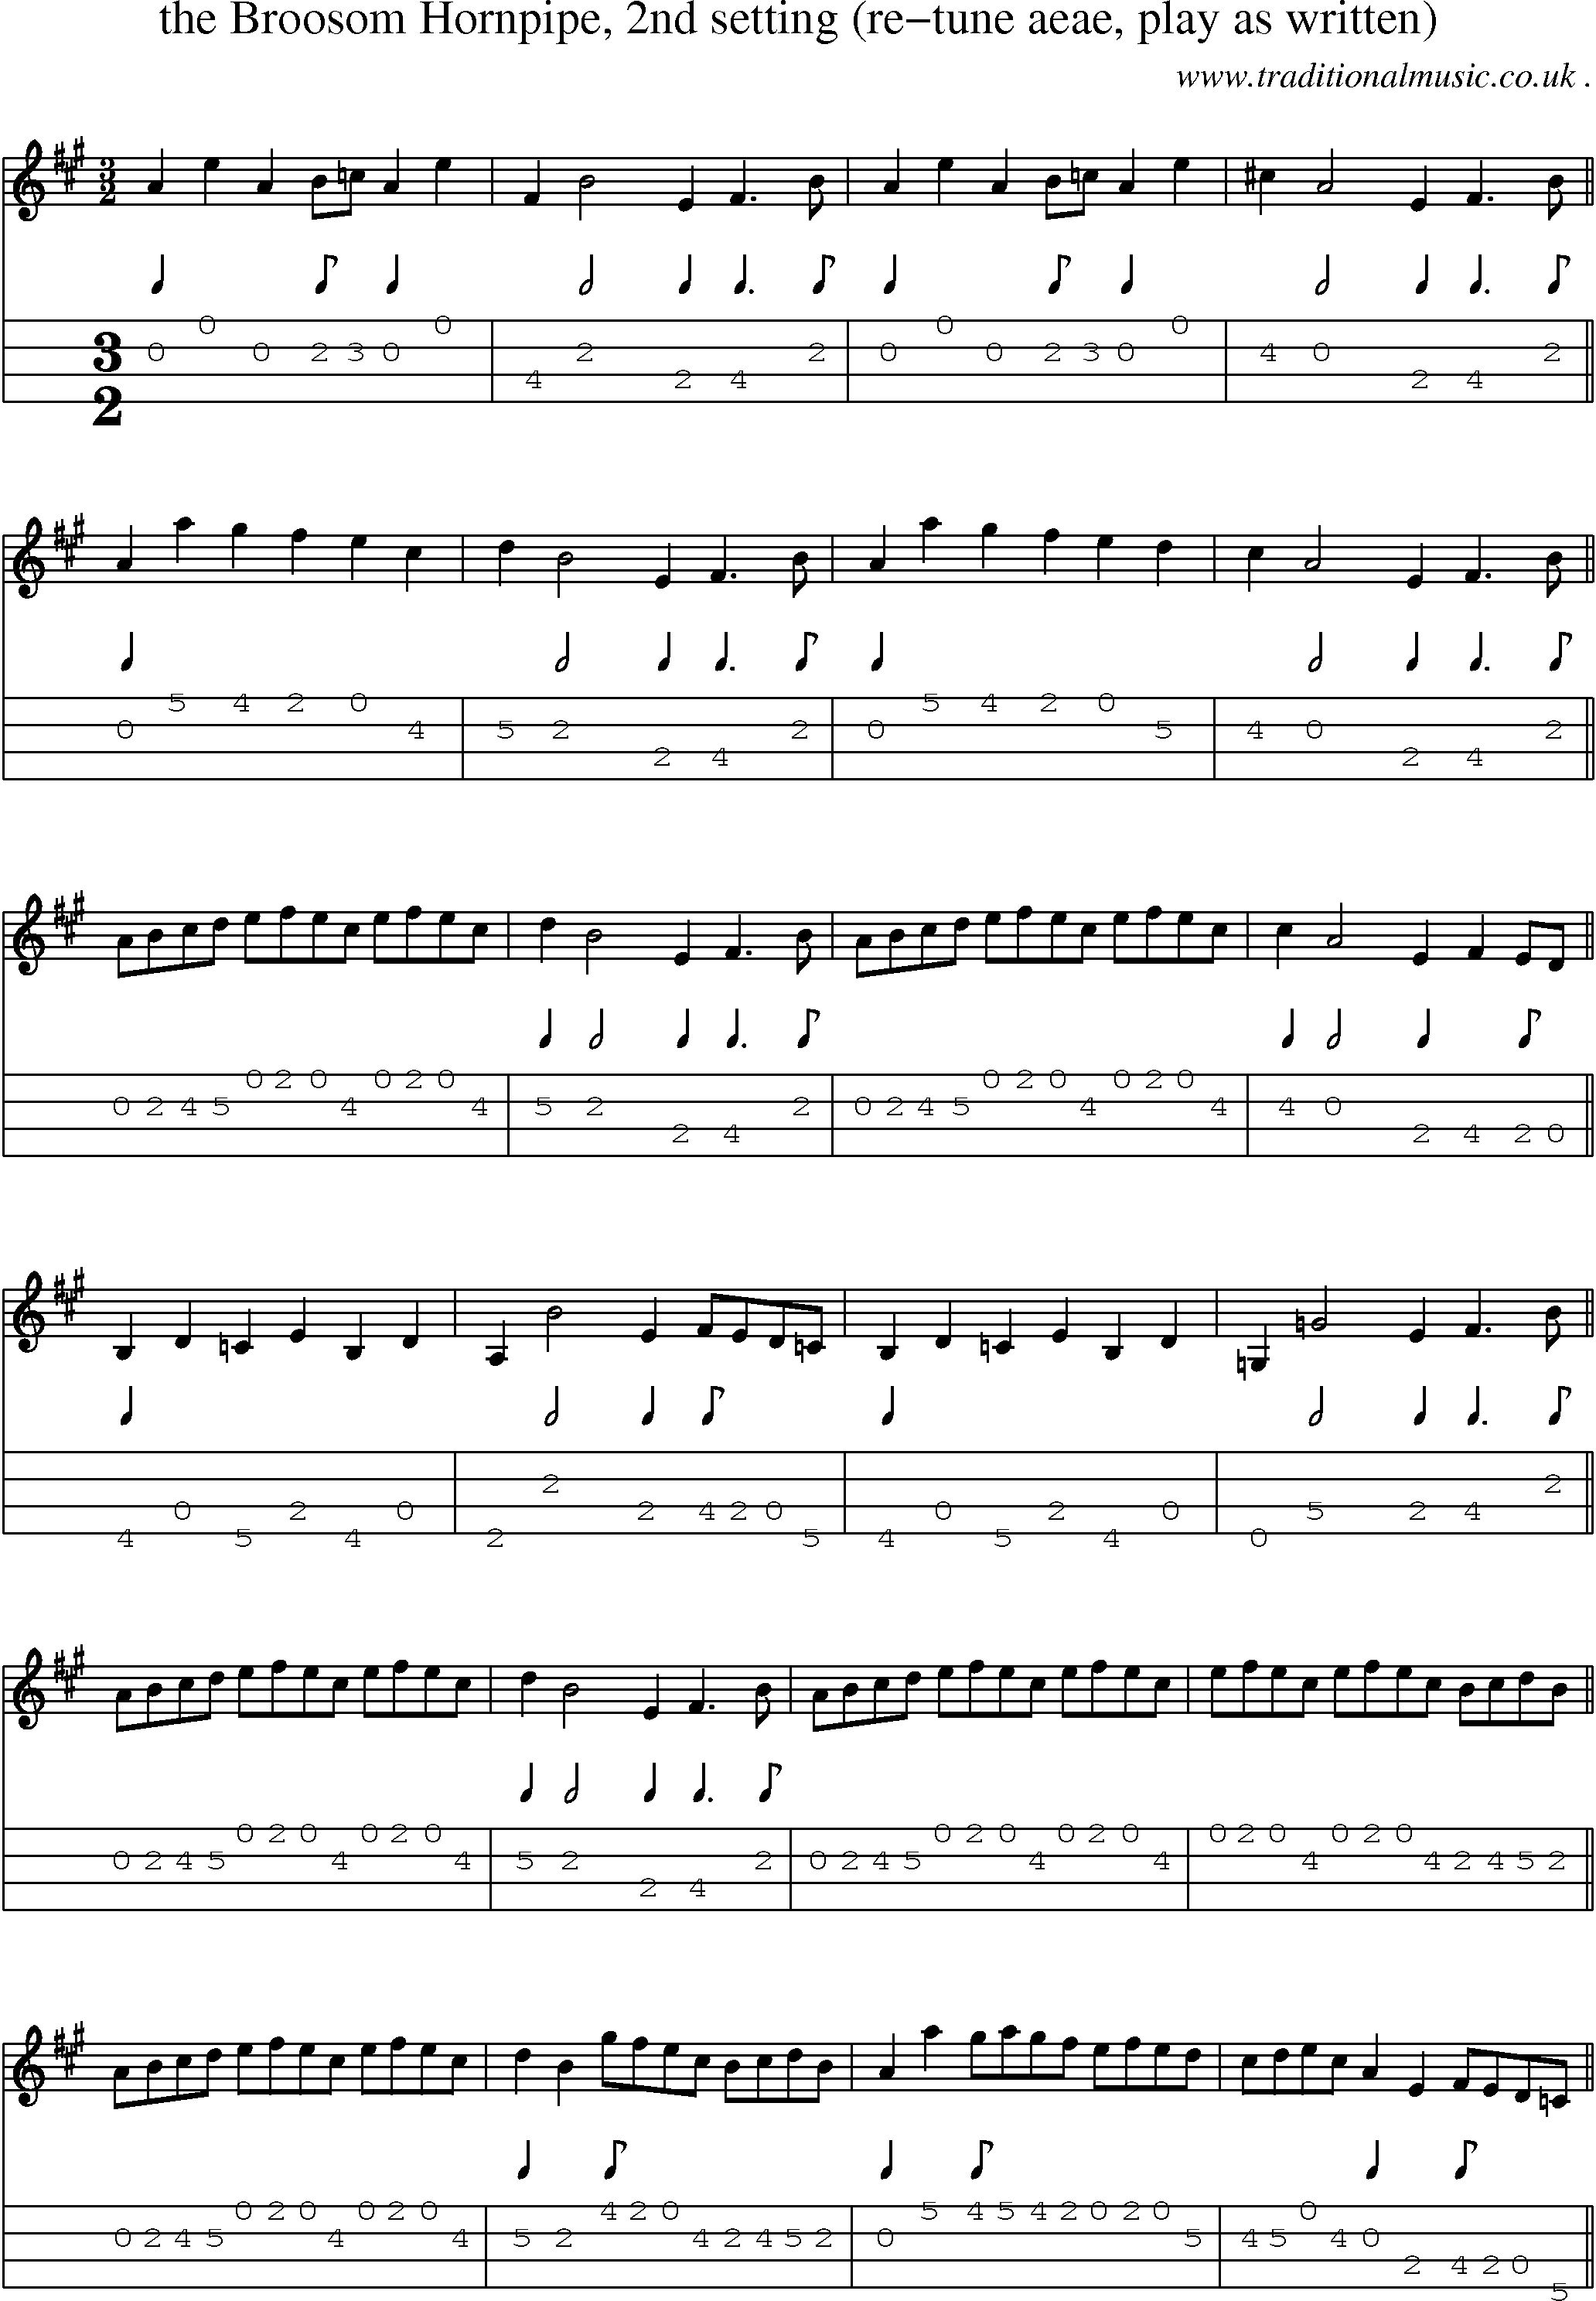 Sheet-Music and Mandolin Tabs for The Broosom Hornpipe 2nd Setting (re-tune Aeae Play As Written)